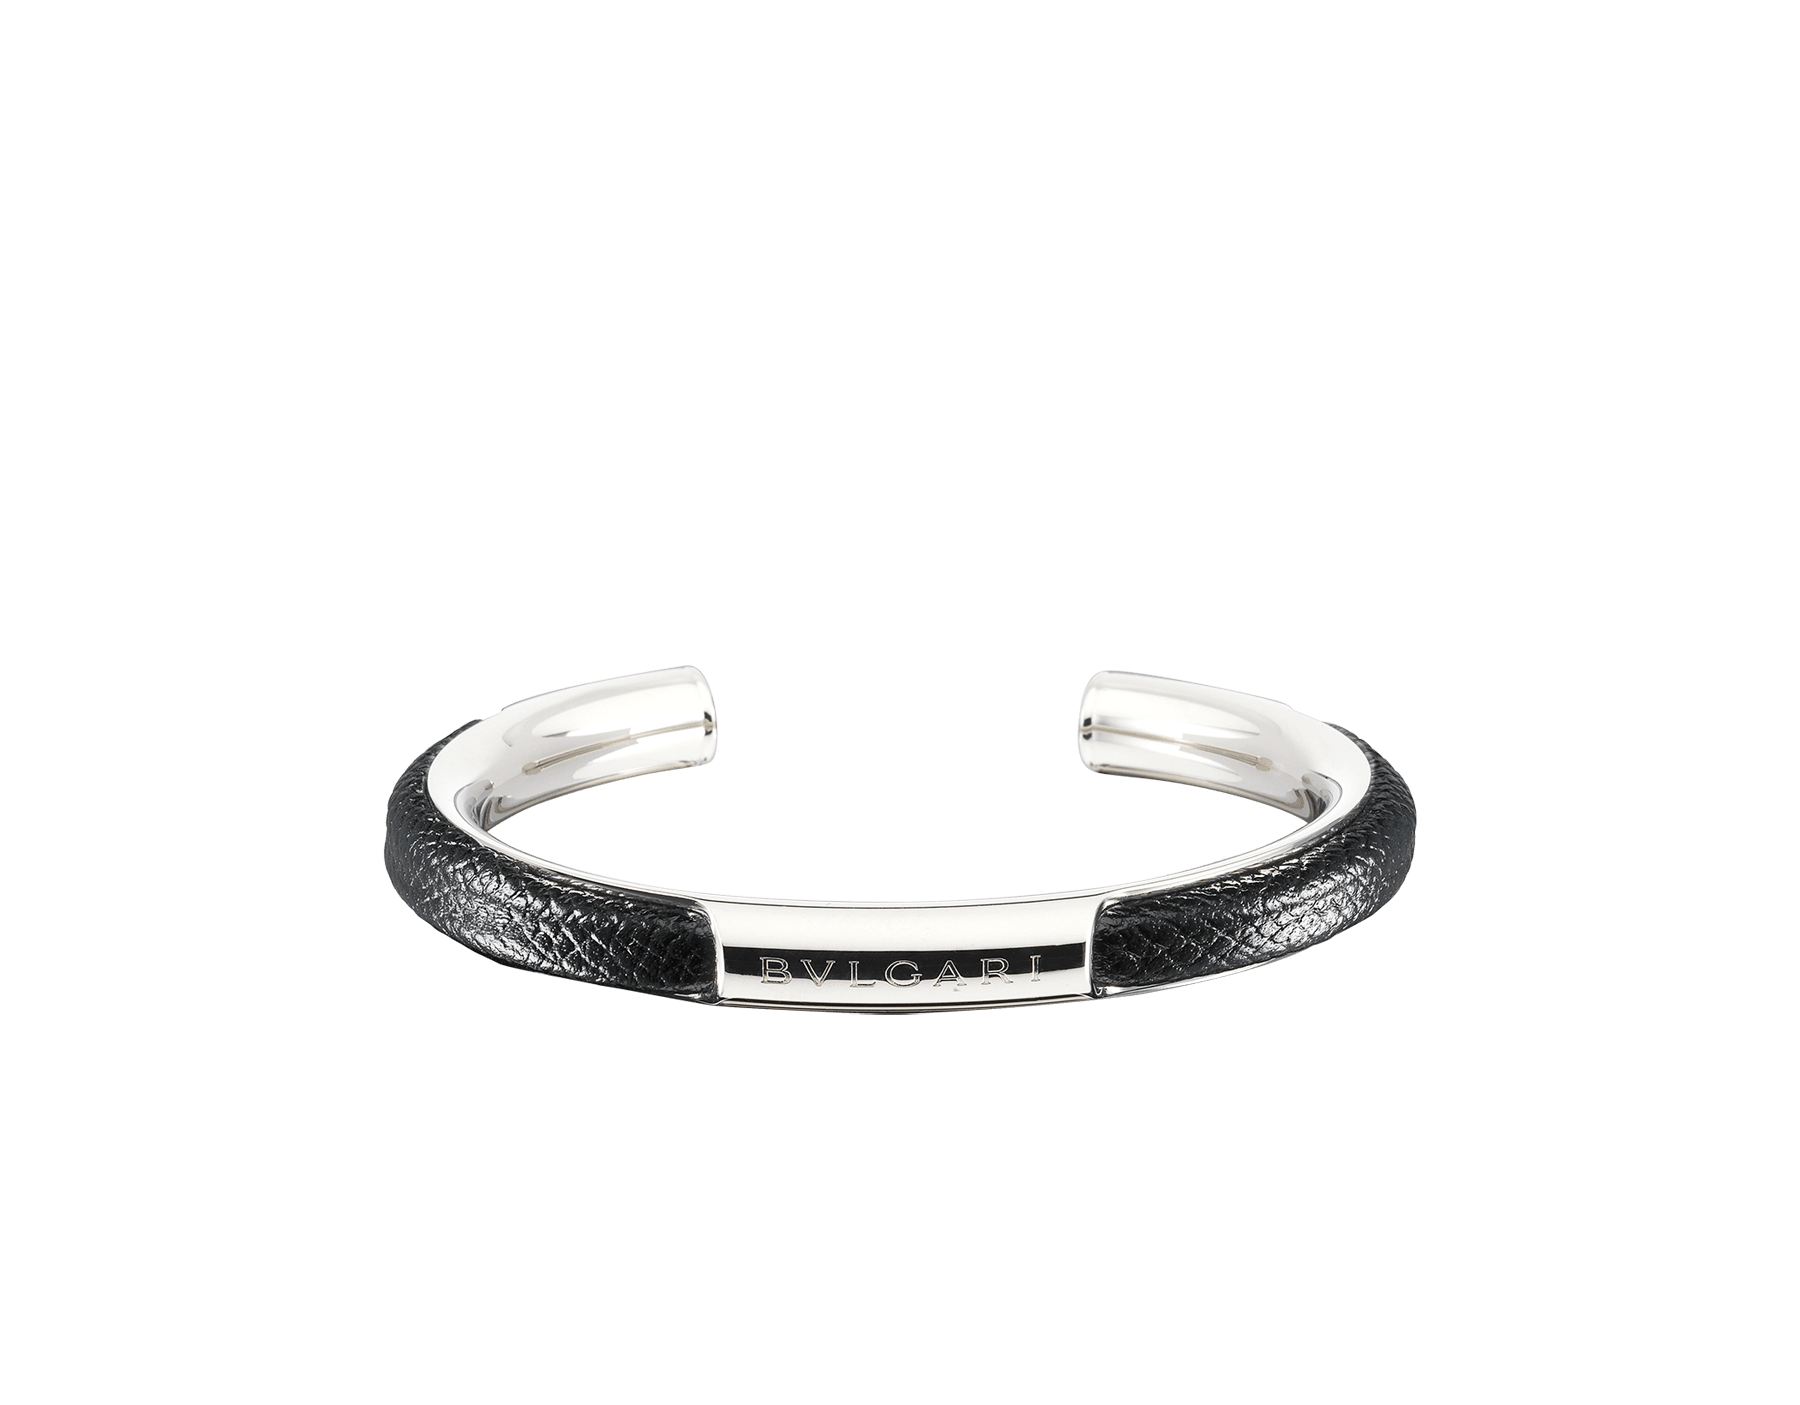 Jewelry For Men Male Jewelry Mens Leather Bracelet Guys Jewelry Mens Bracelet Mens Jewelry Male Bracelet Bracelets For Men Mens Cuff Bracelet 